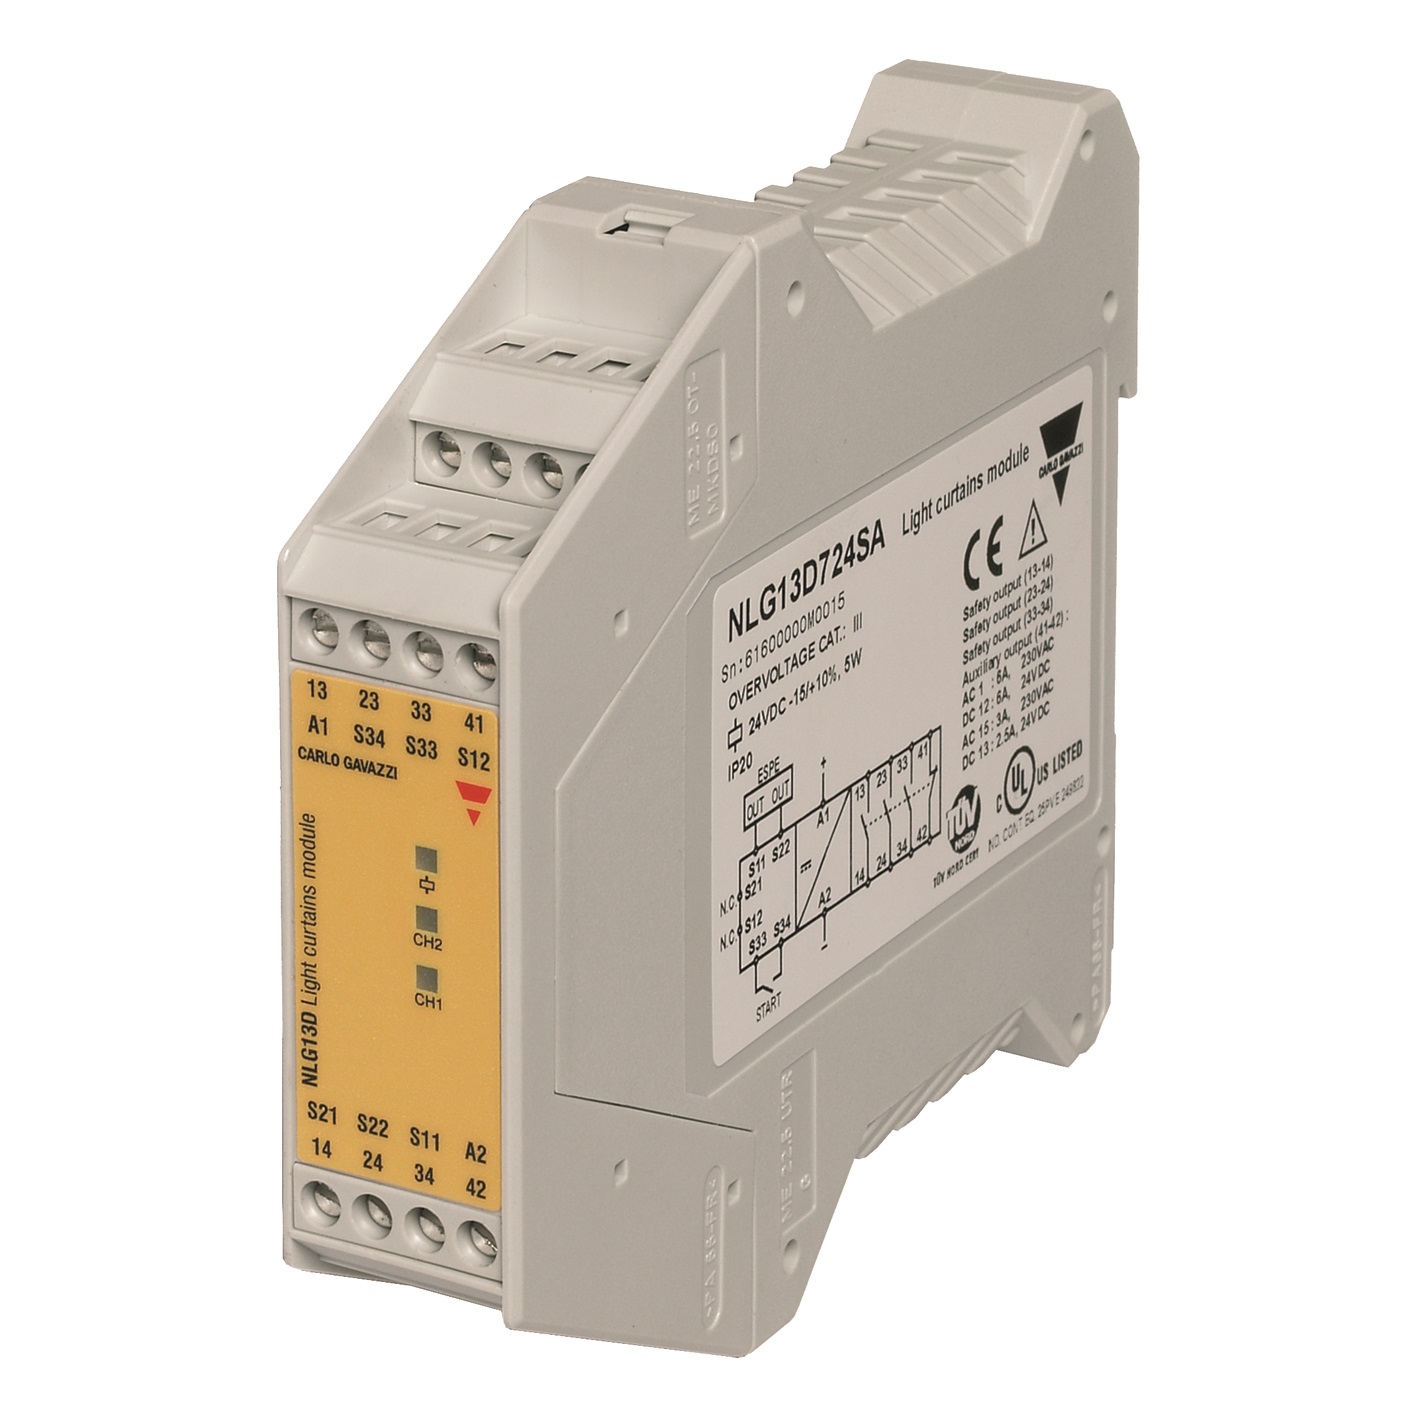 Details about   Carlo Gavazzi GC18S Magnetic Contactor 1NO 1NC DC24V 